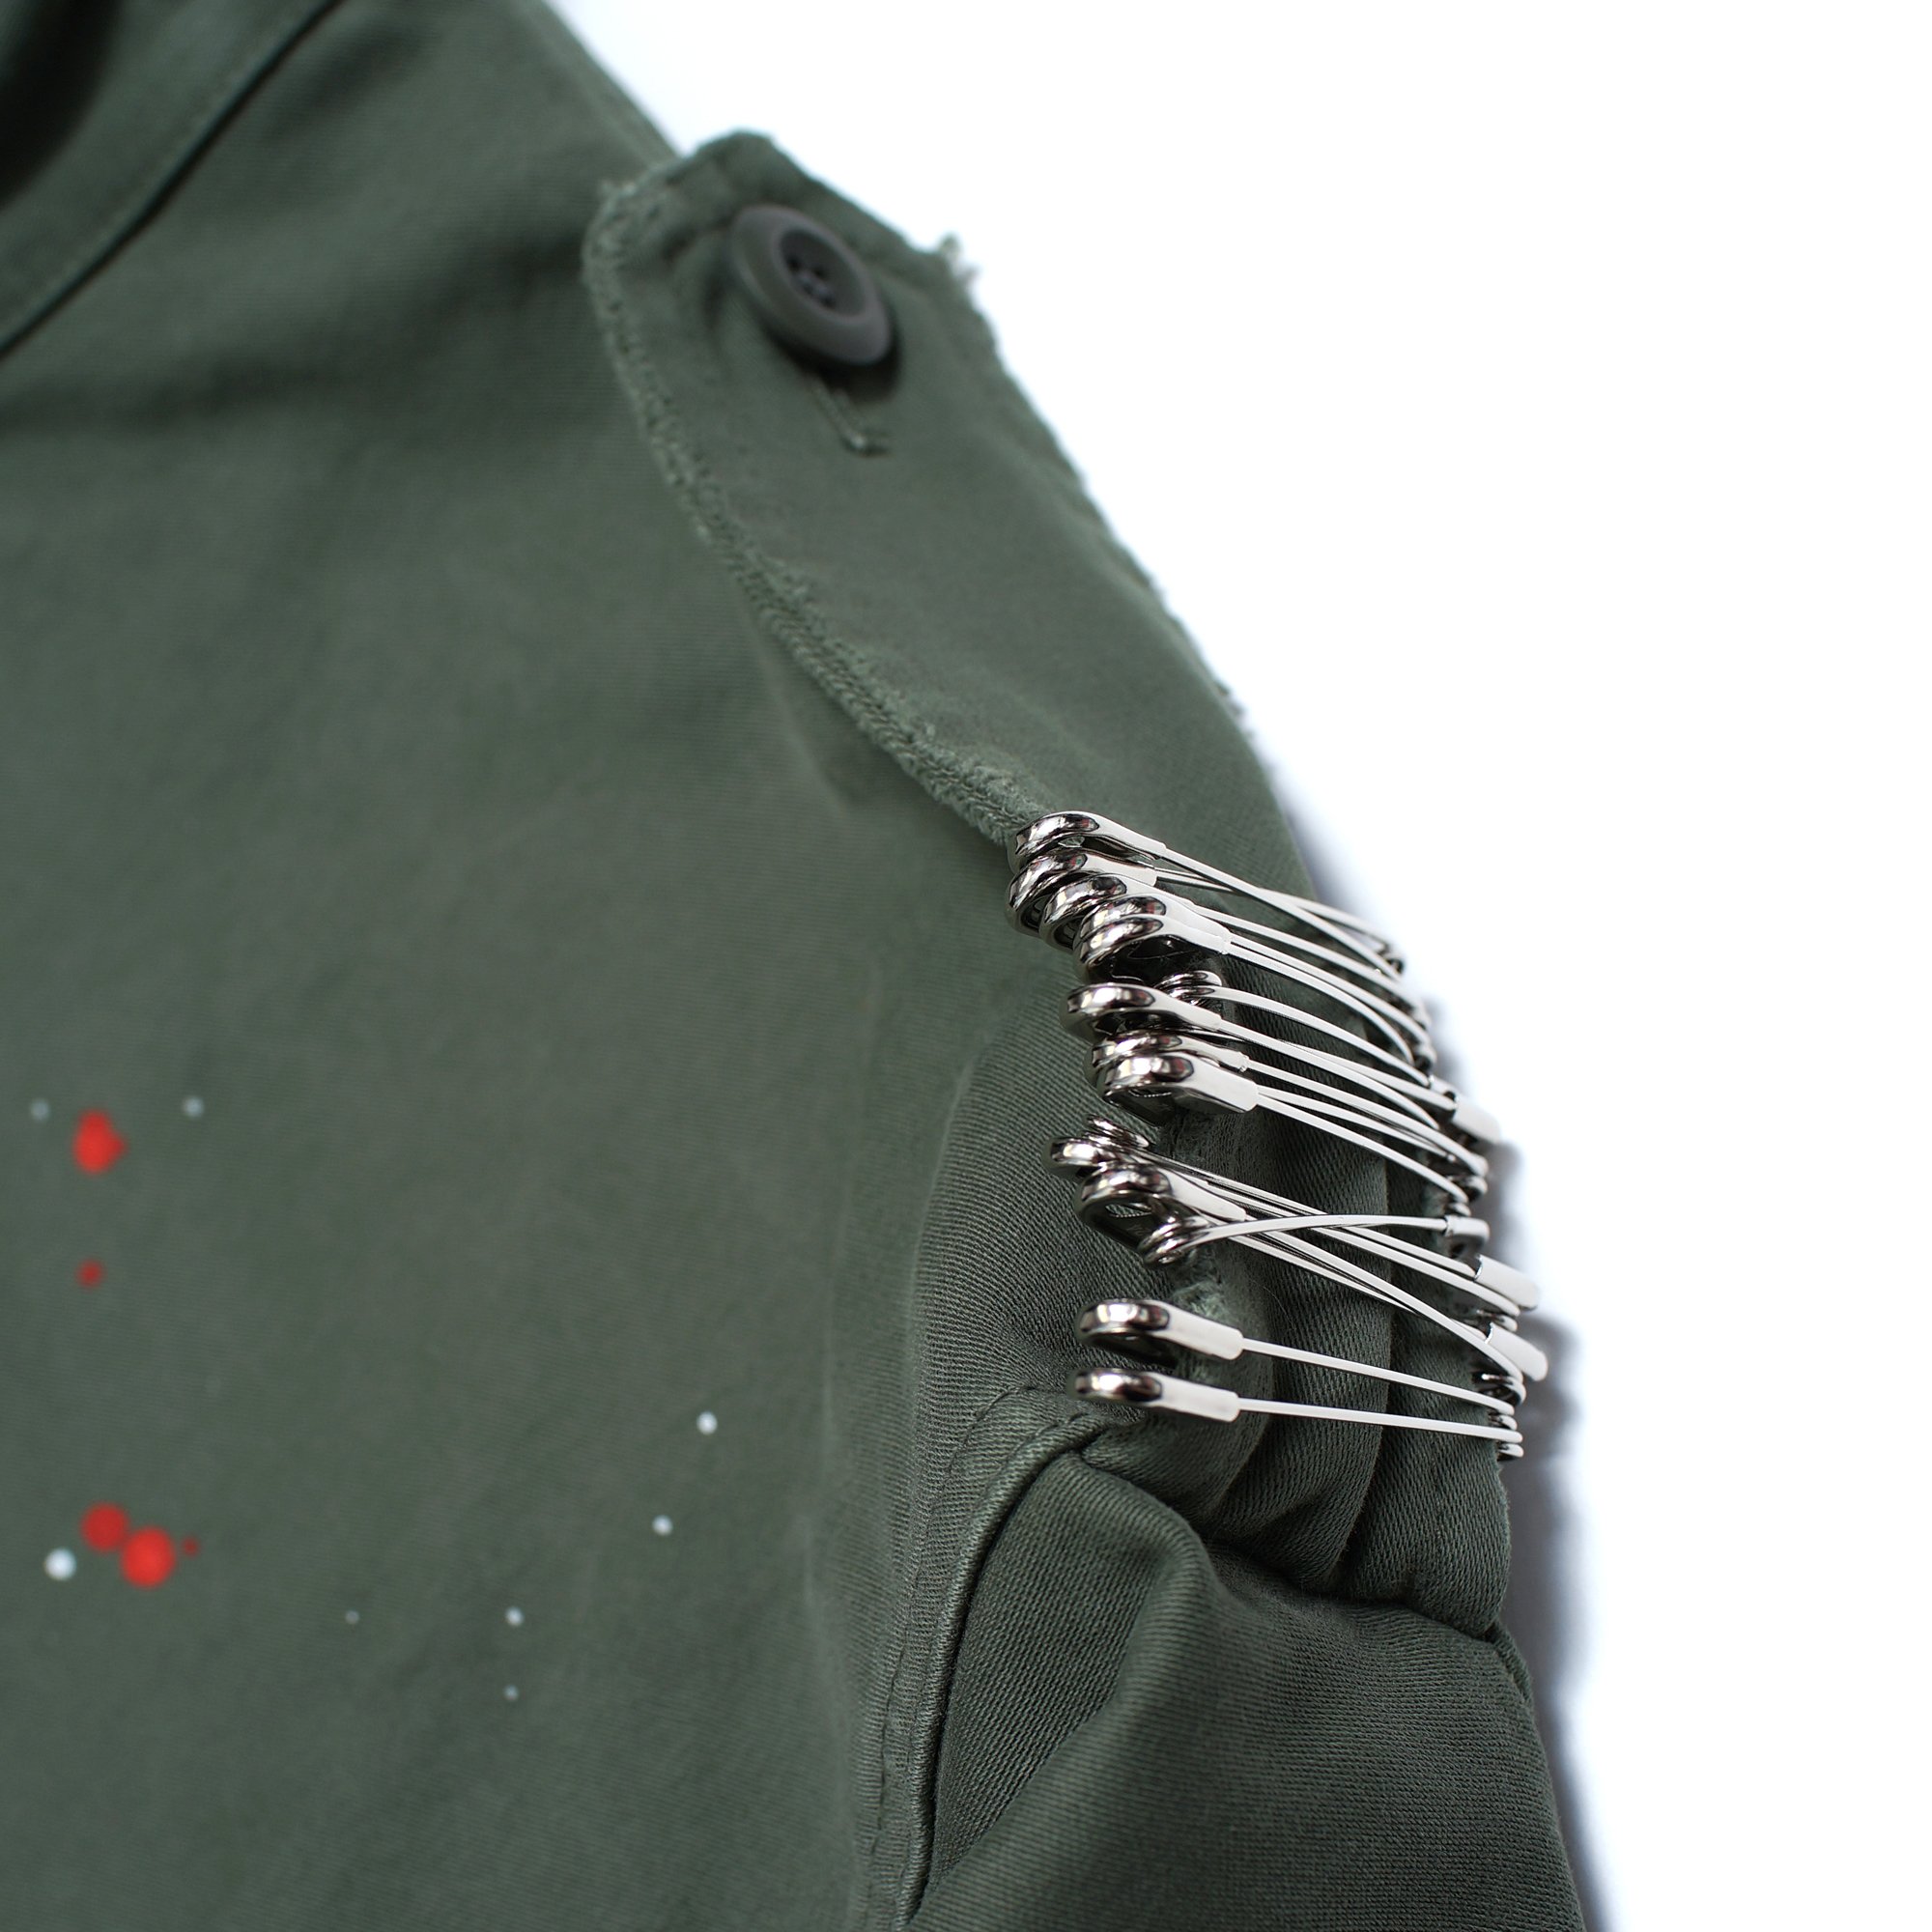 Unarmed Smooth Outcome 424onFairfax on Twitter: "424 x Alpha Industries x Slam Jam M-65 anarchy  field jacket https://t.co/Qc9knJ9YHJ https://t.co/F20IfcOeo6" / Twitter